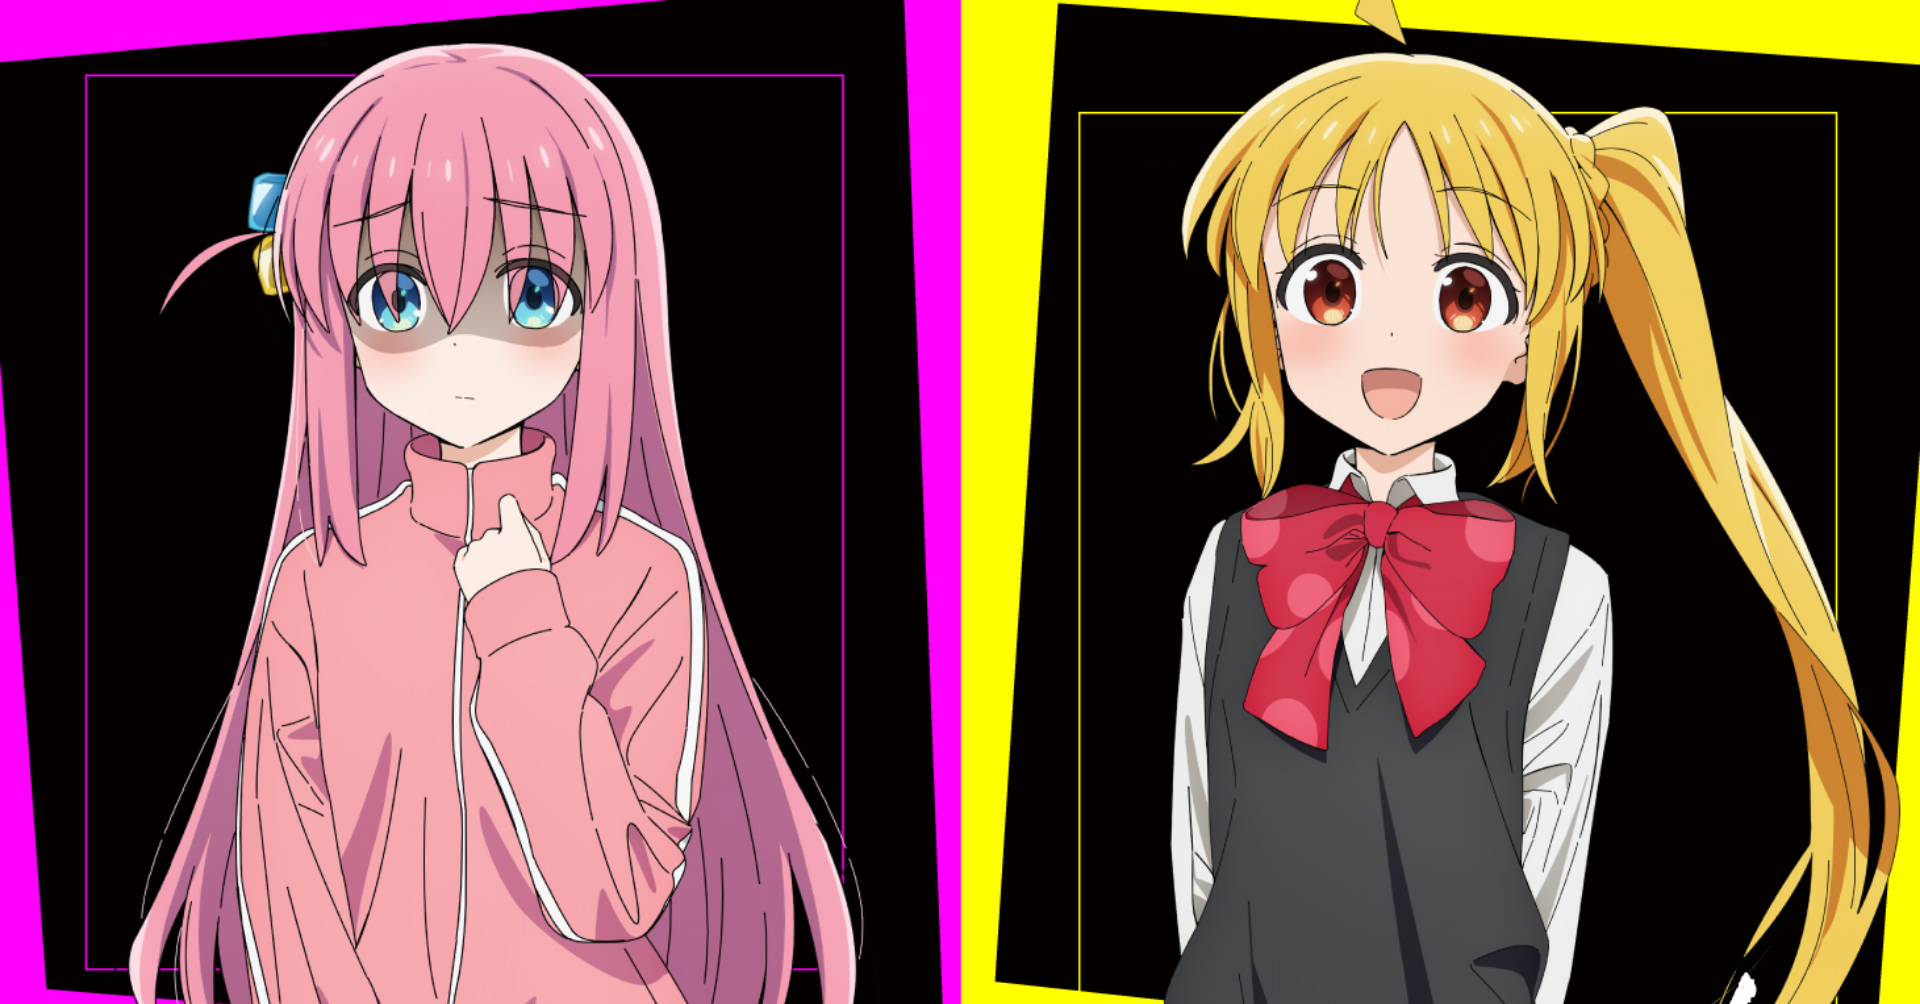 Anime Corner - Did you know? Characters from Bocchi the